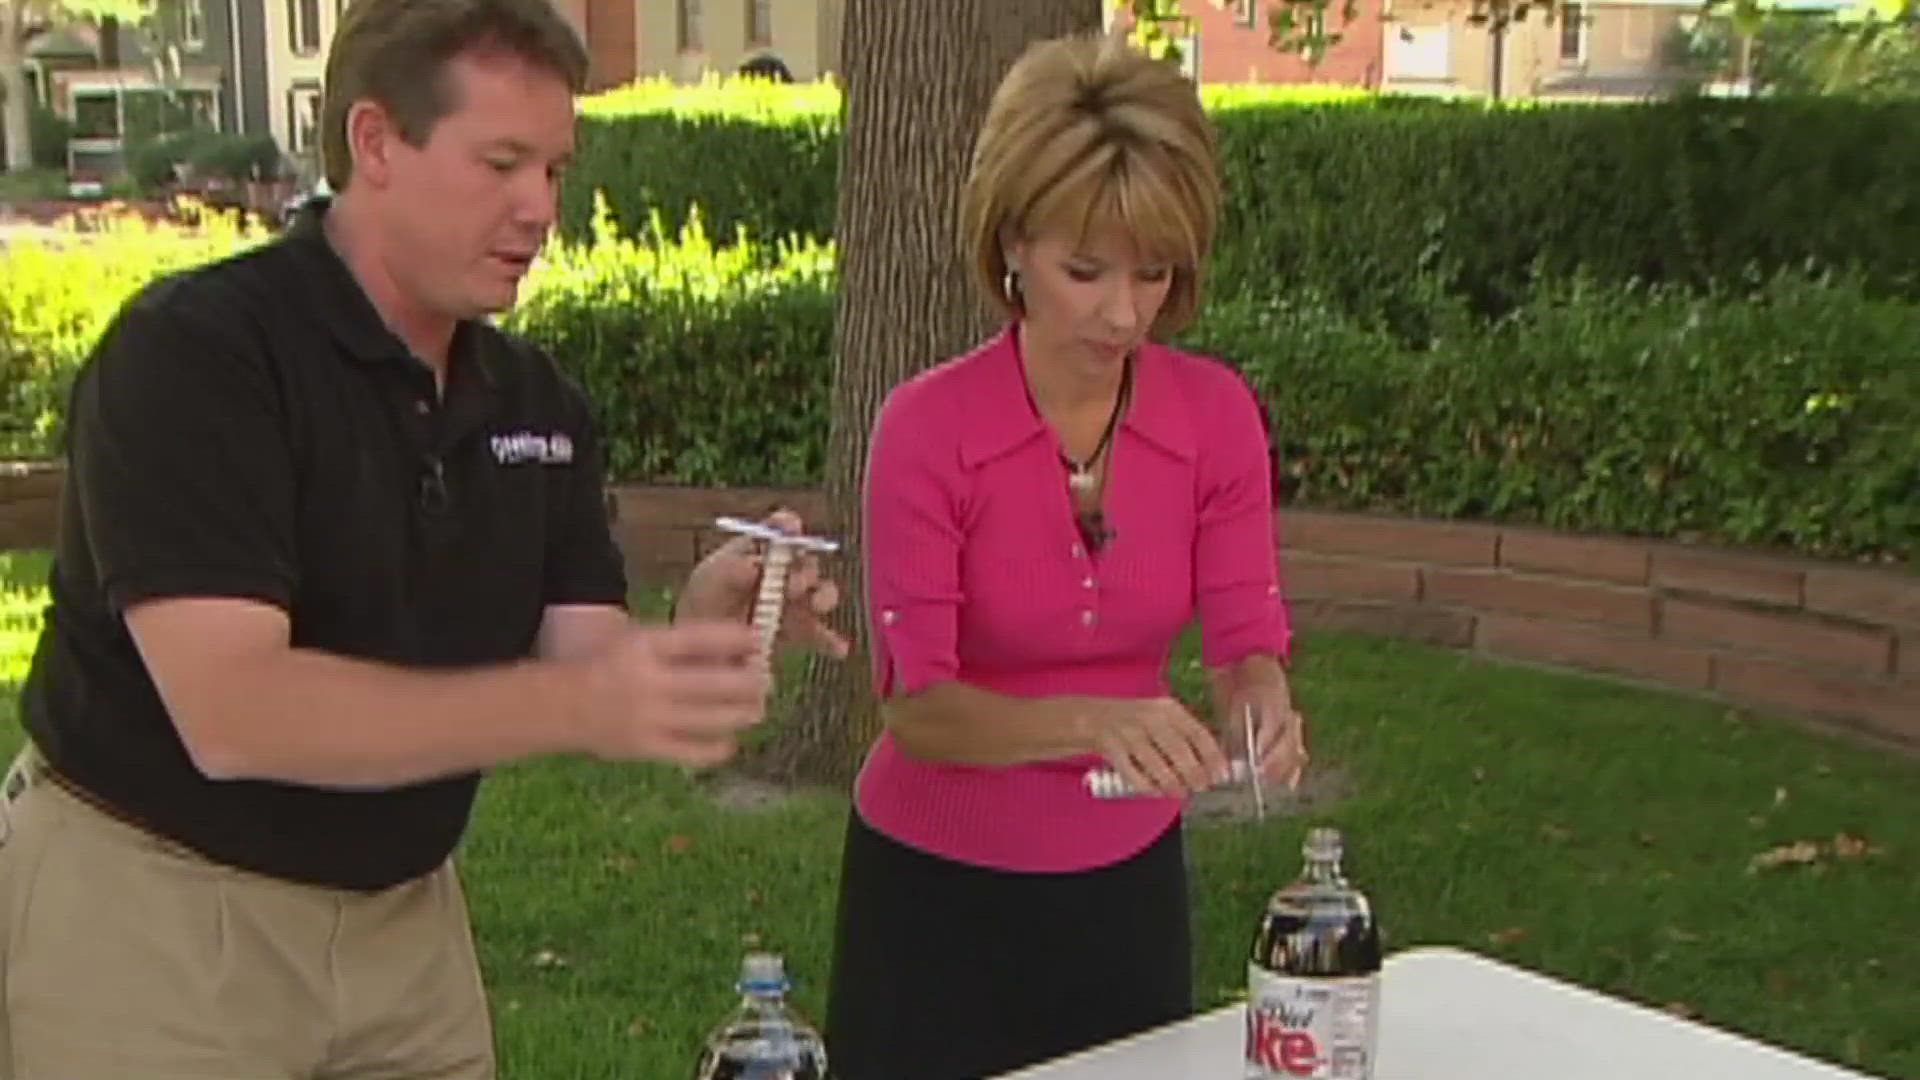 Steve Spangler demonstrates a reaction between candy and soda.